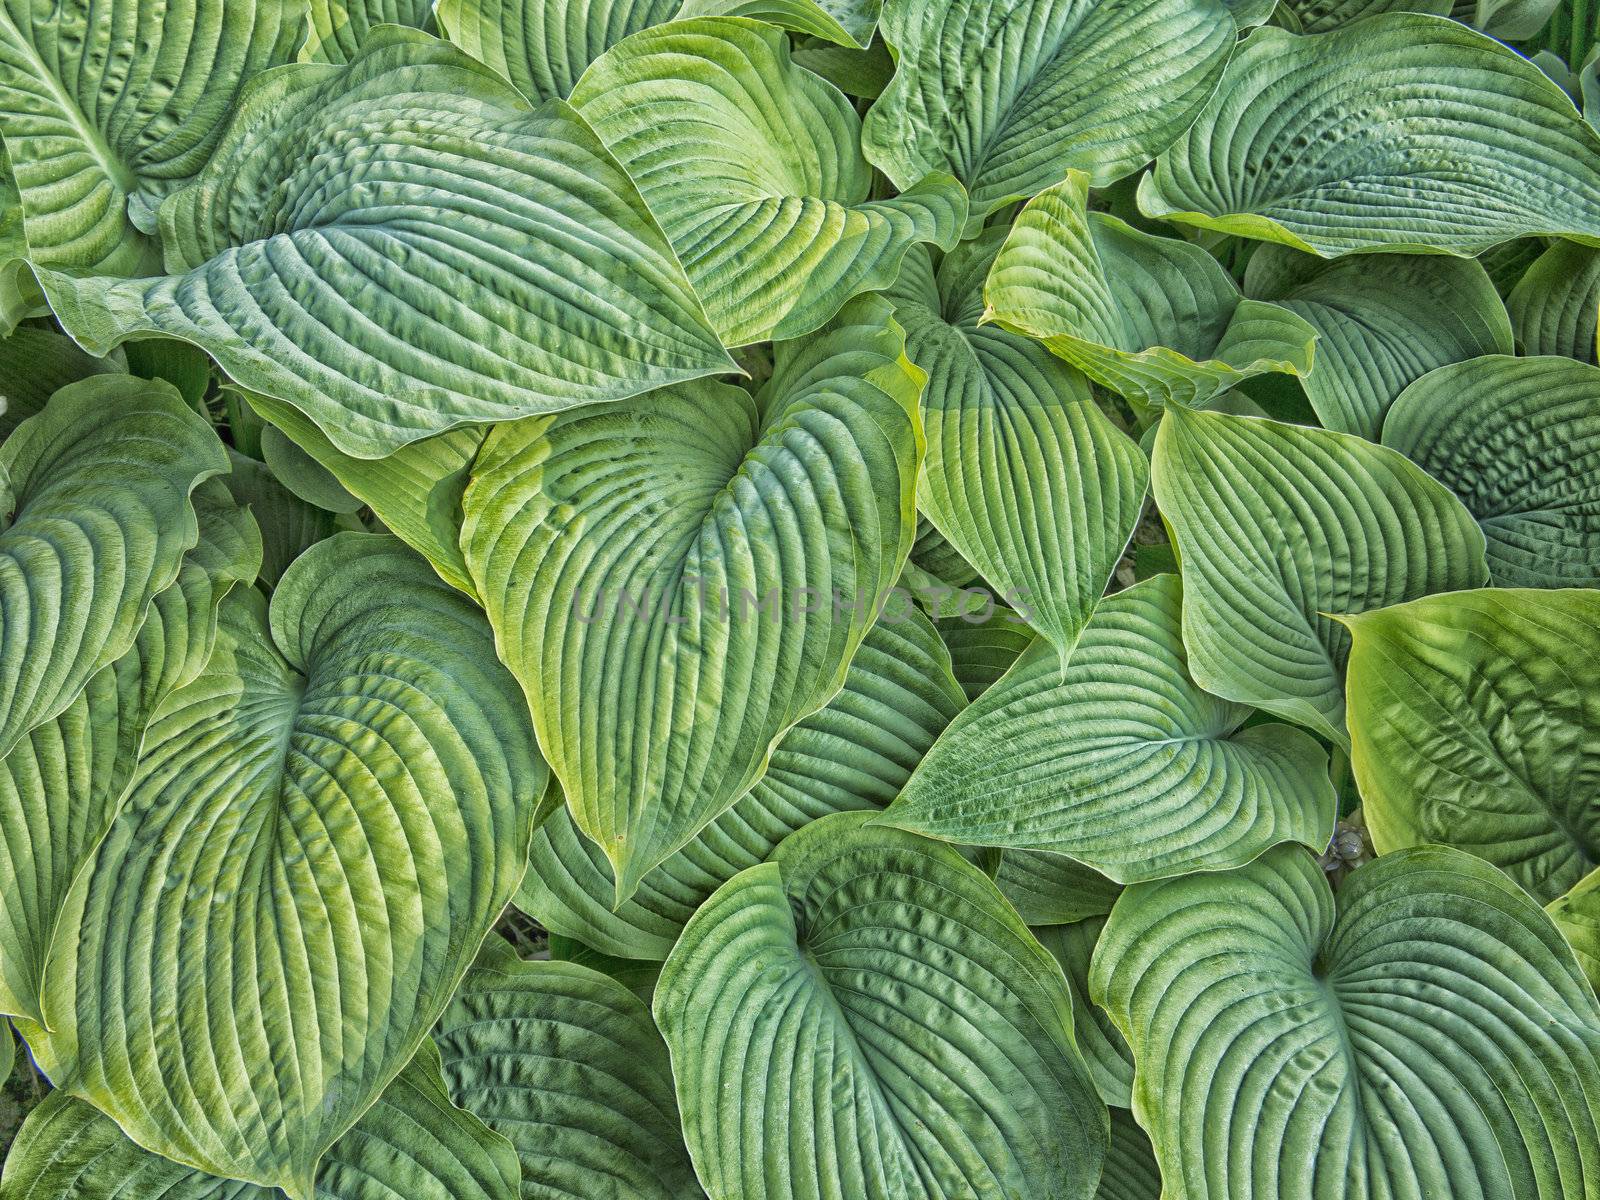 Hosta background by ABCDK